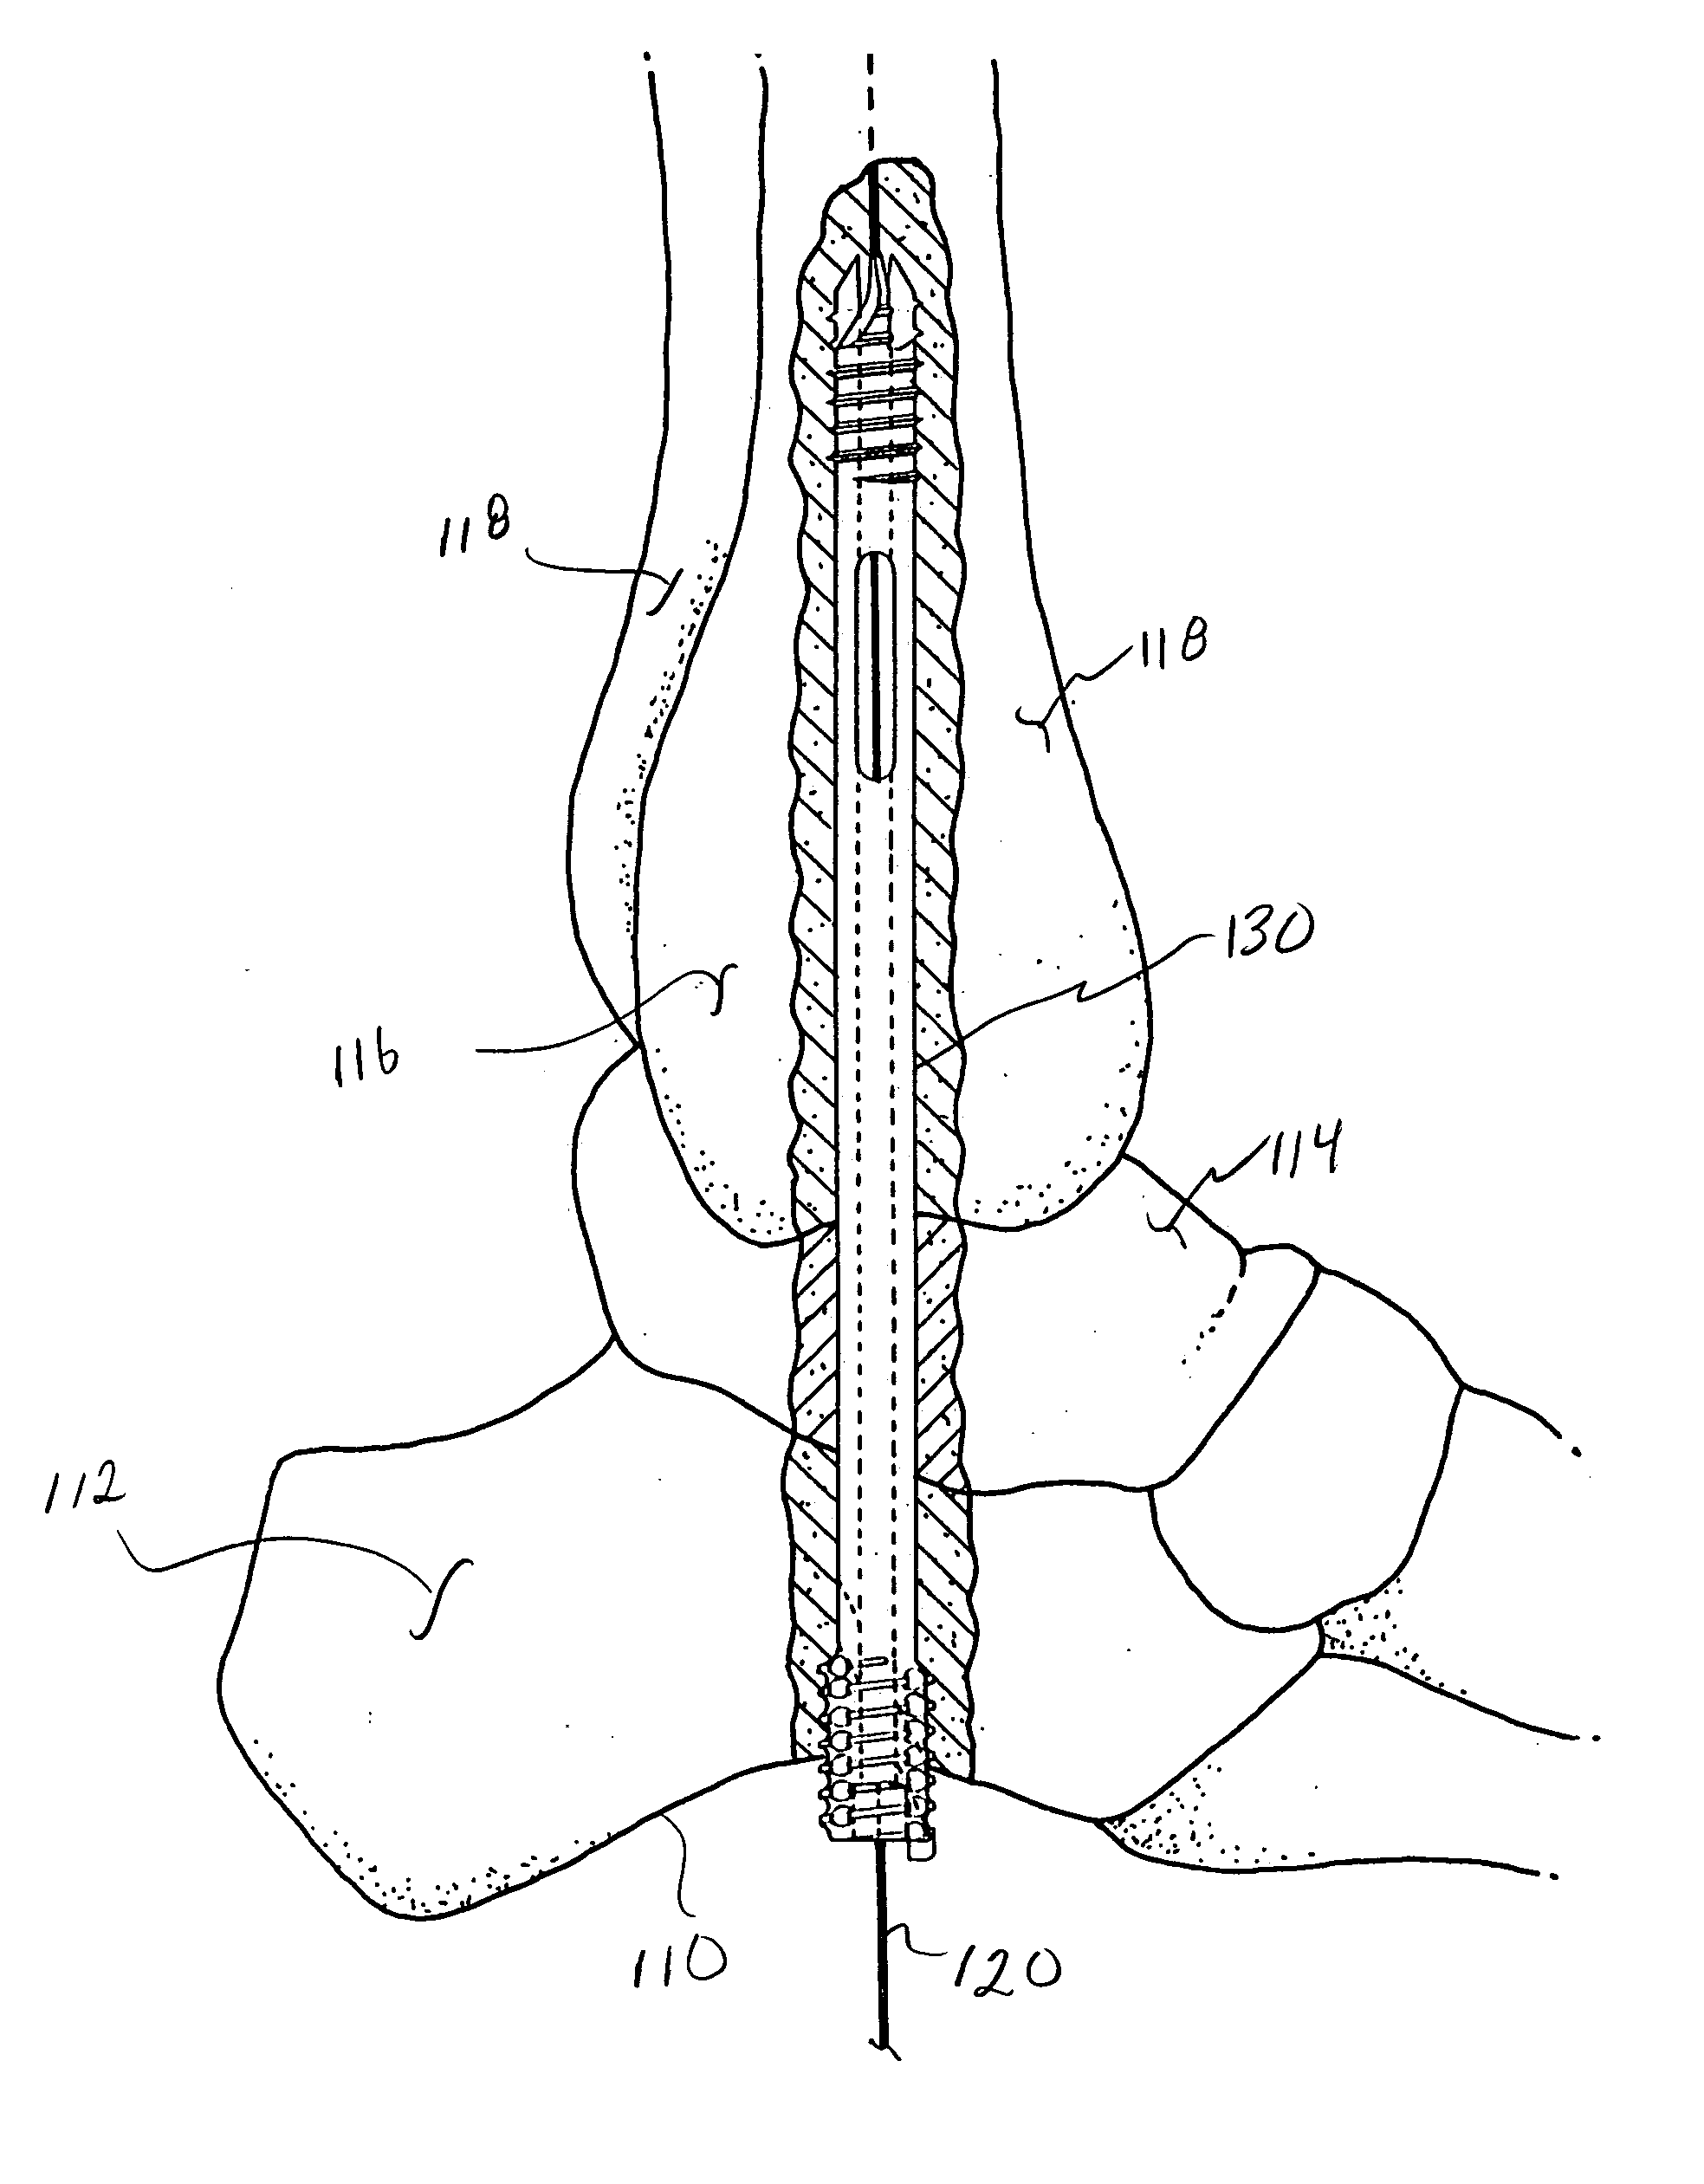 Intramedullary locked compression screw for stabiliziation and union of complex ankle and subtalar deformities